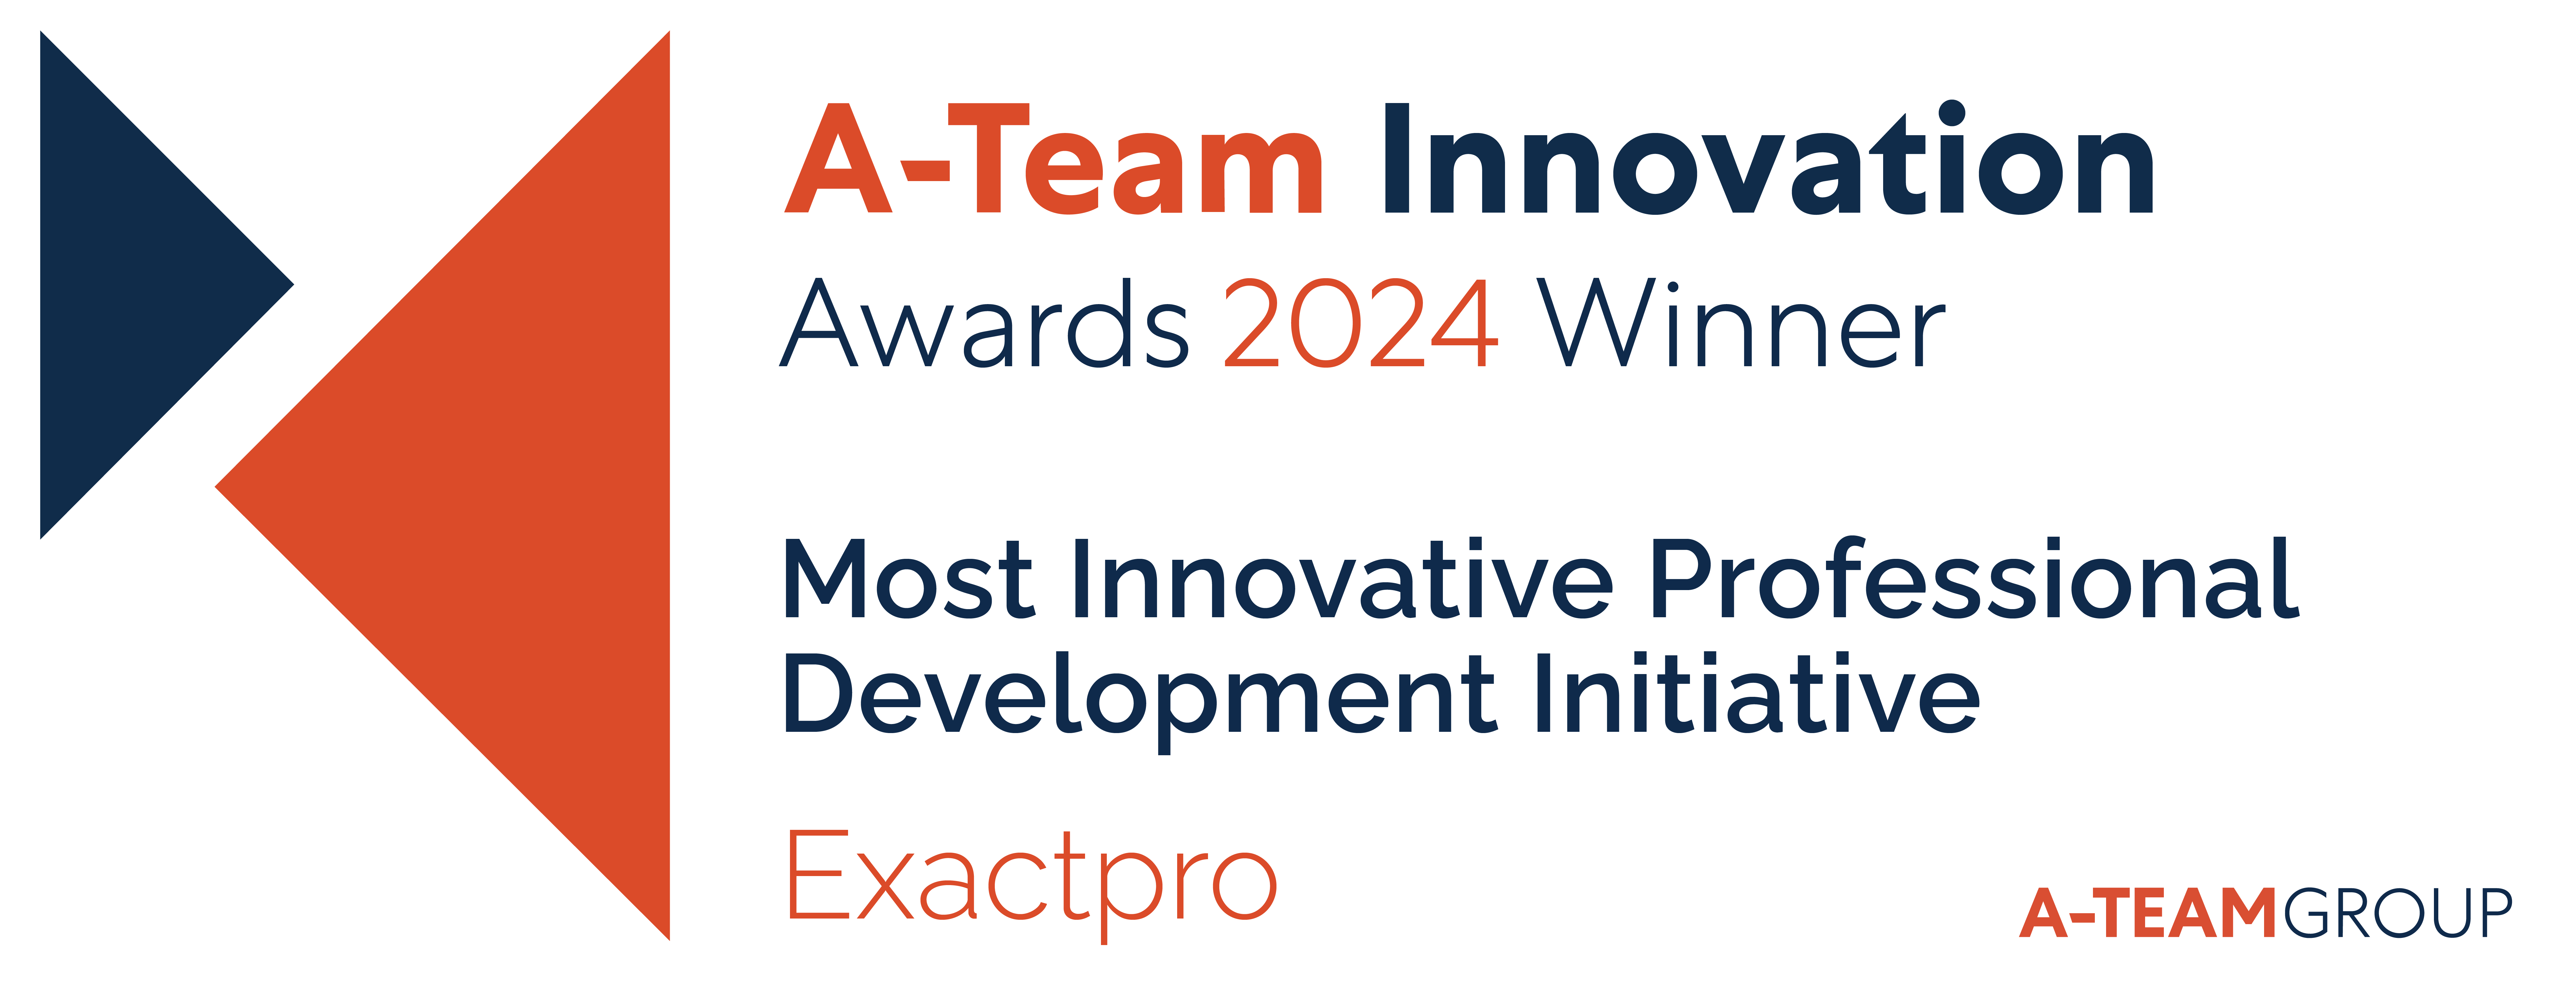 Exactpro’s AI Testing Training Course Awarded Most Innovative Professional Development Initiative by A-Team Group